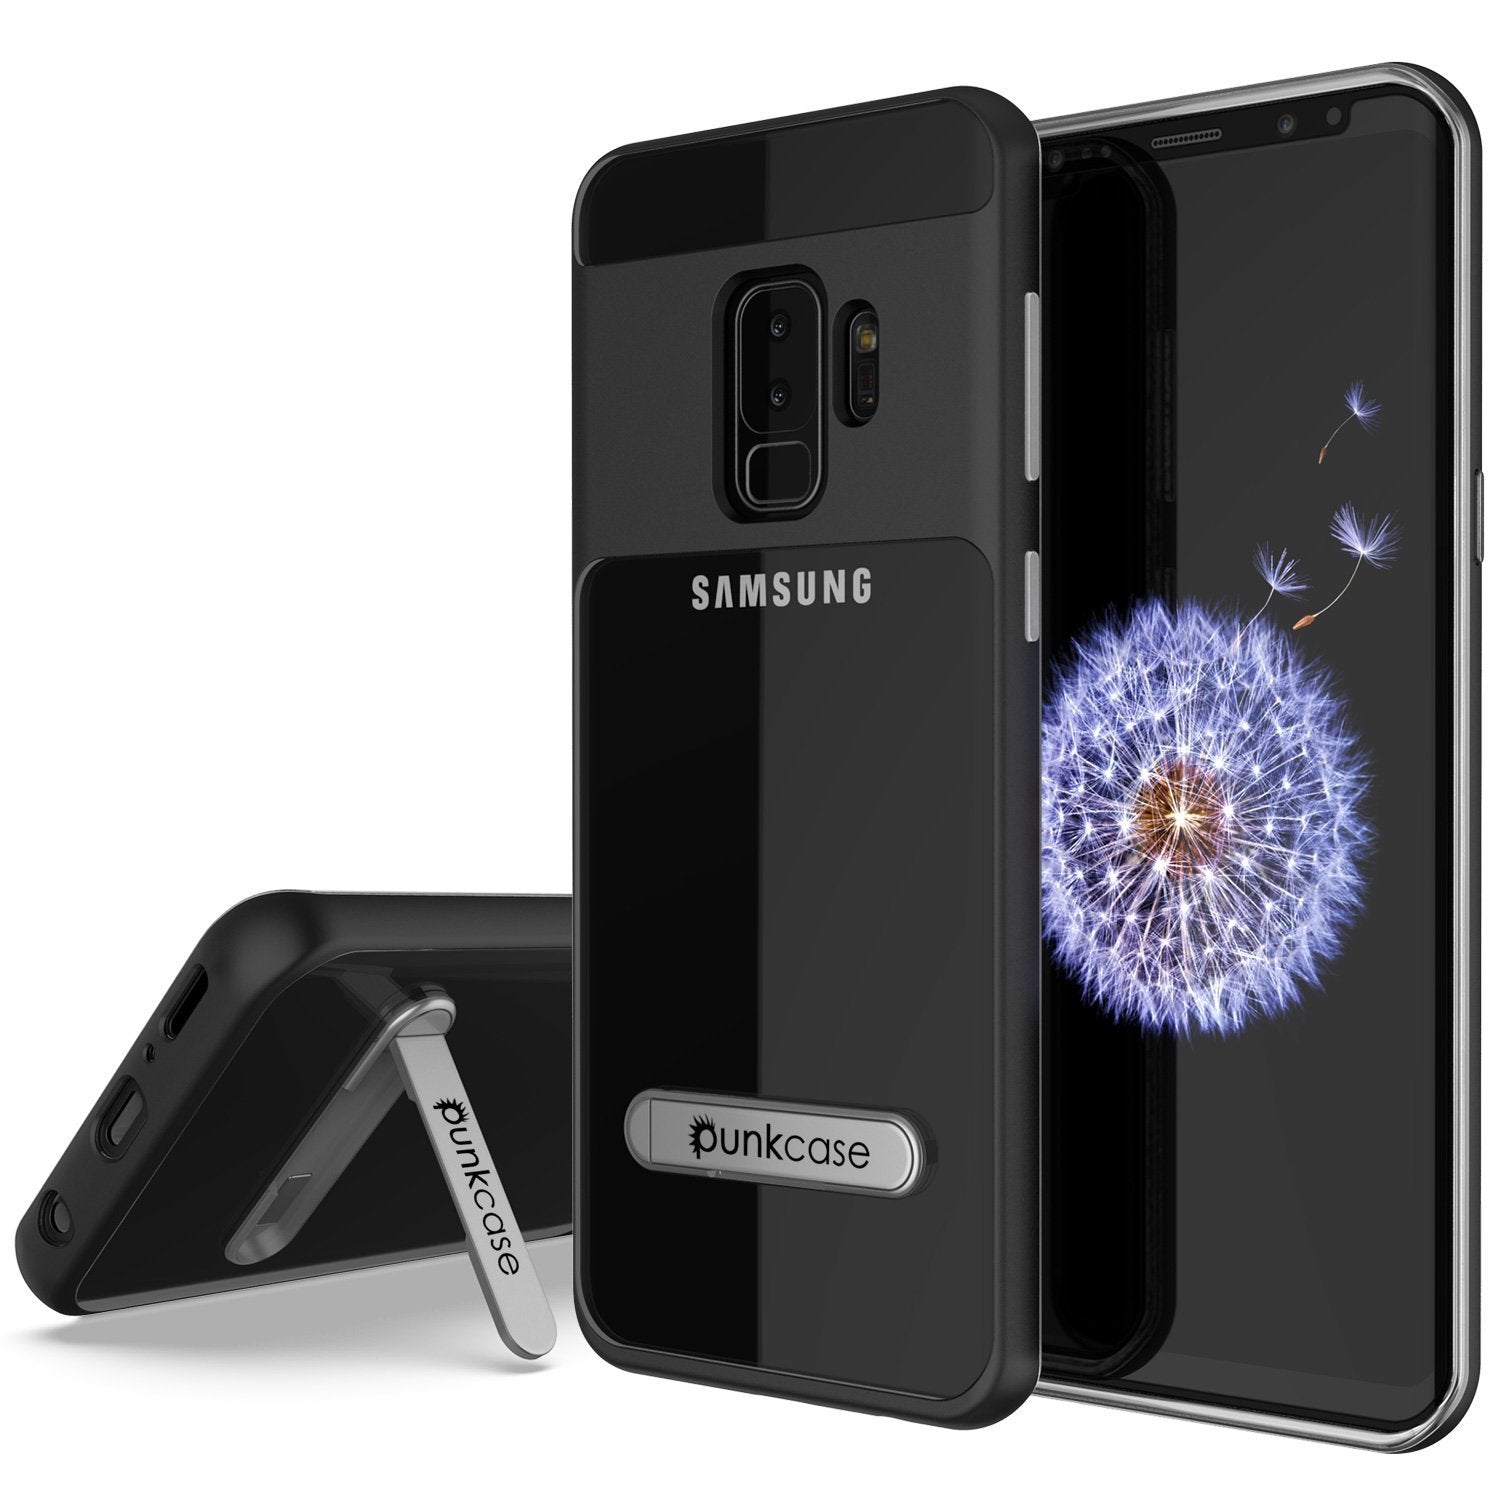 Galaxy S9+ Plus Case, PUNKcase [LUCID 3.0 Series] [Slim Fit] [Clear Back] Armor Cover w/ Integrated Kickstand, Anti-Shock System & PUNKSHIELD Screen Protector for Samsung Galaxy S9+ Plus [Black]